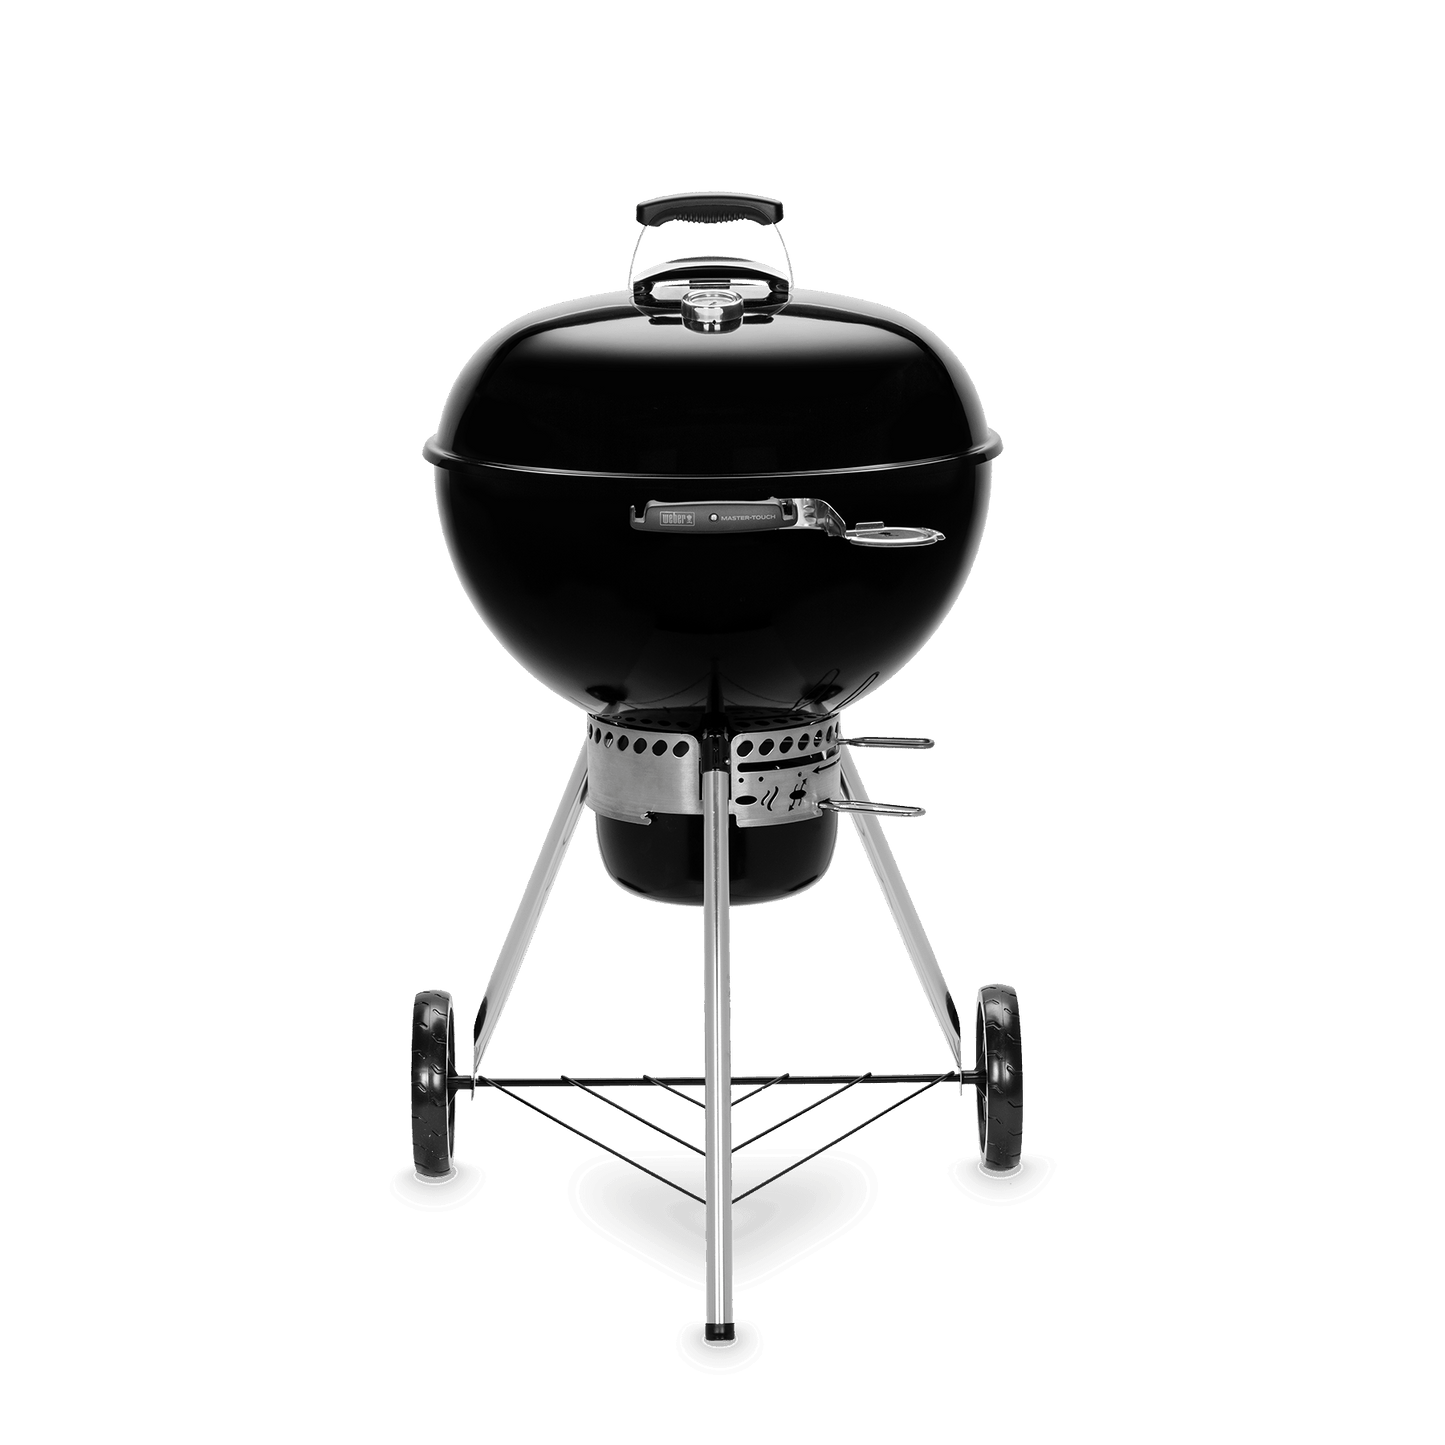 Weber 57cm Master Touch Kettle GBS Grill